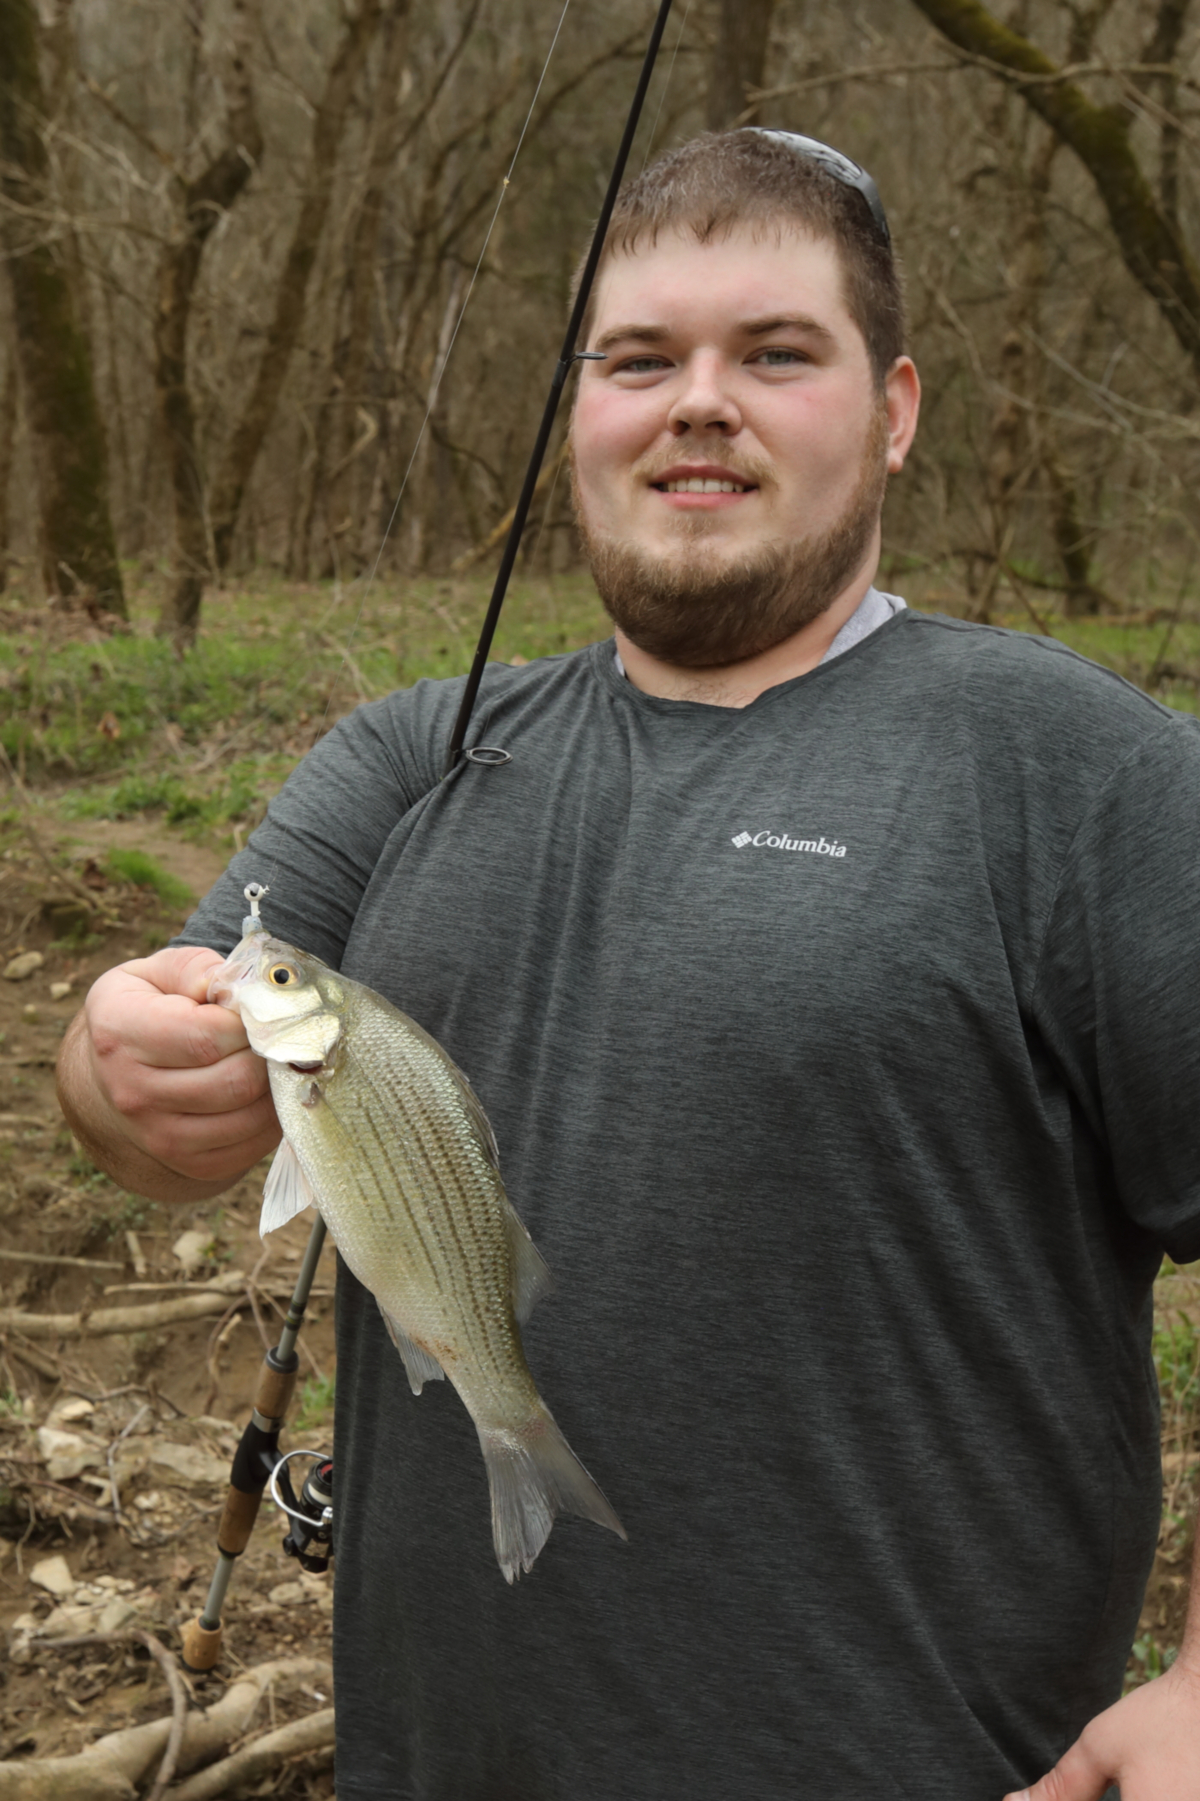 A Young man is holding up a white bass in his left hand and a fishing pole in his right